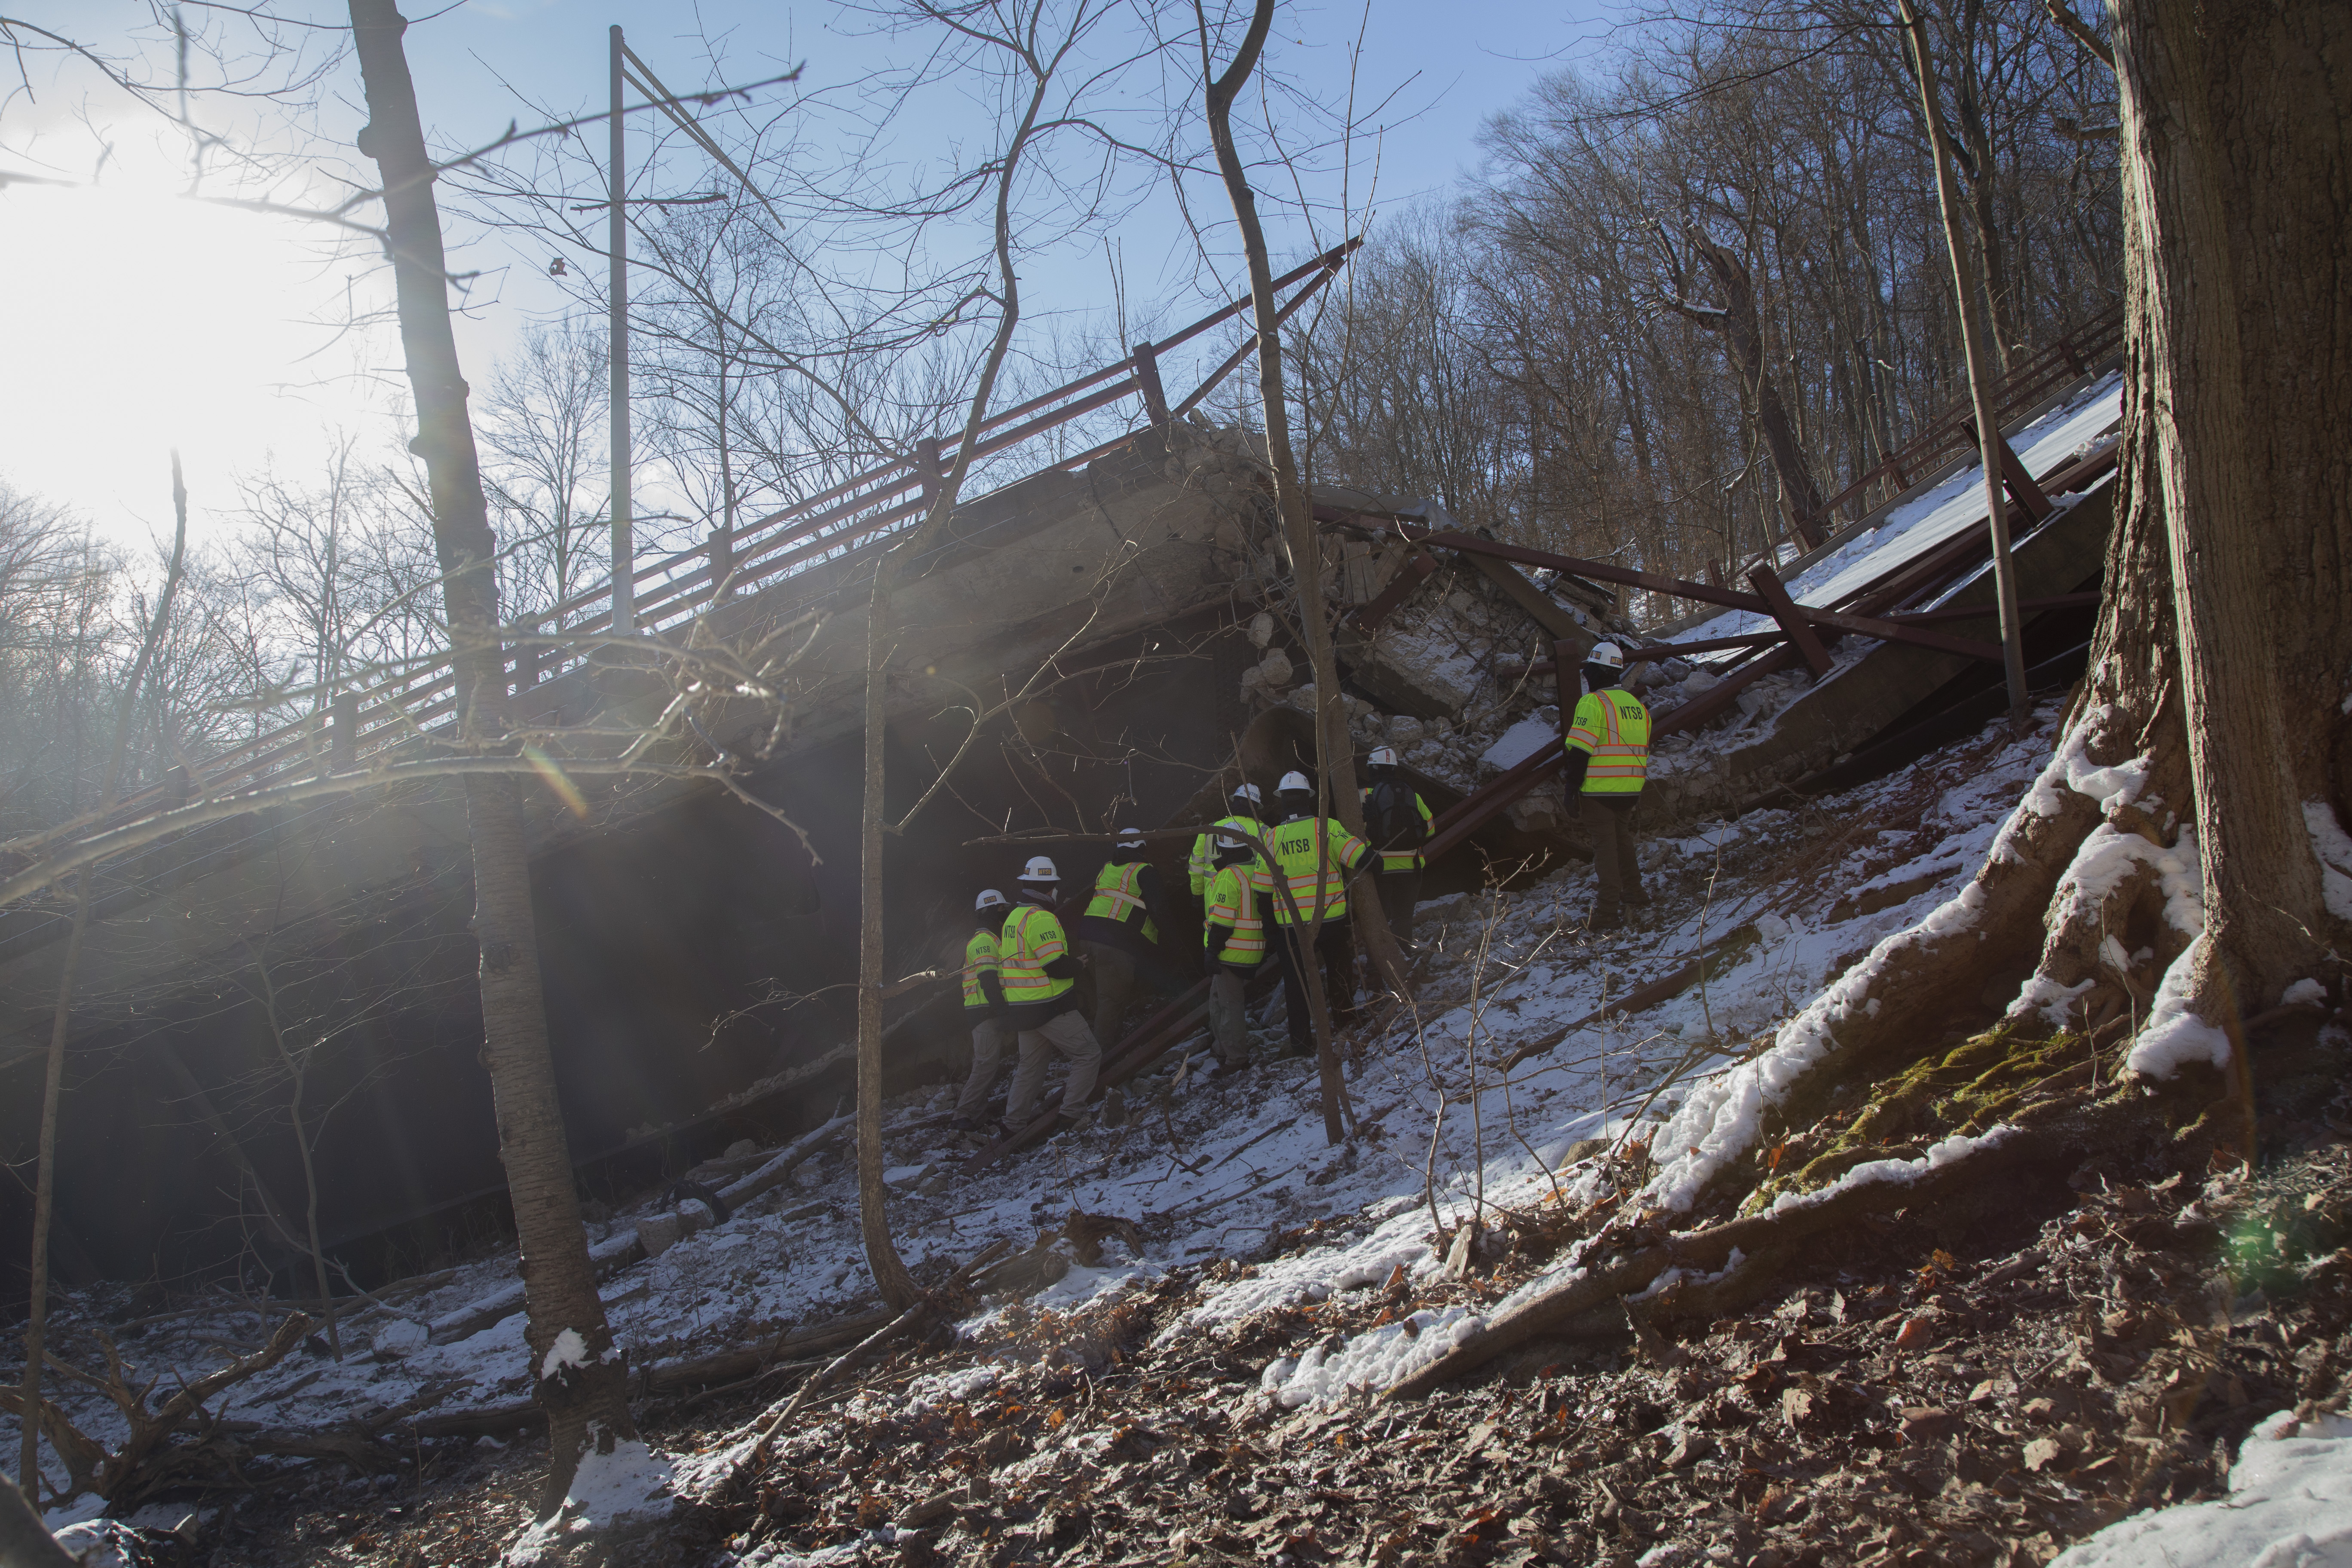 ​​NTSB investigators at the site of the collapsed bridge in Pittsburgh, PA. (Source: James Anderson, NTSB)